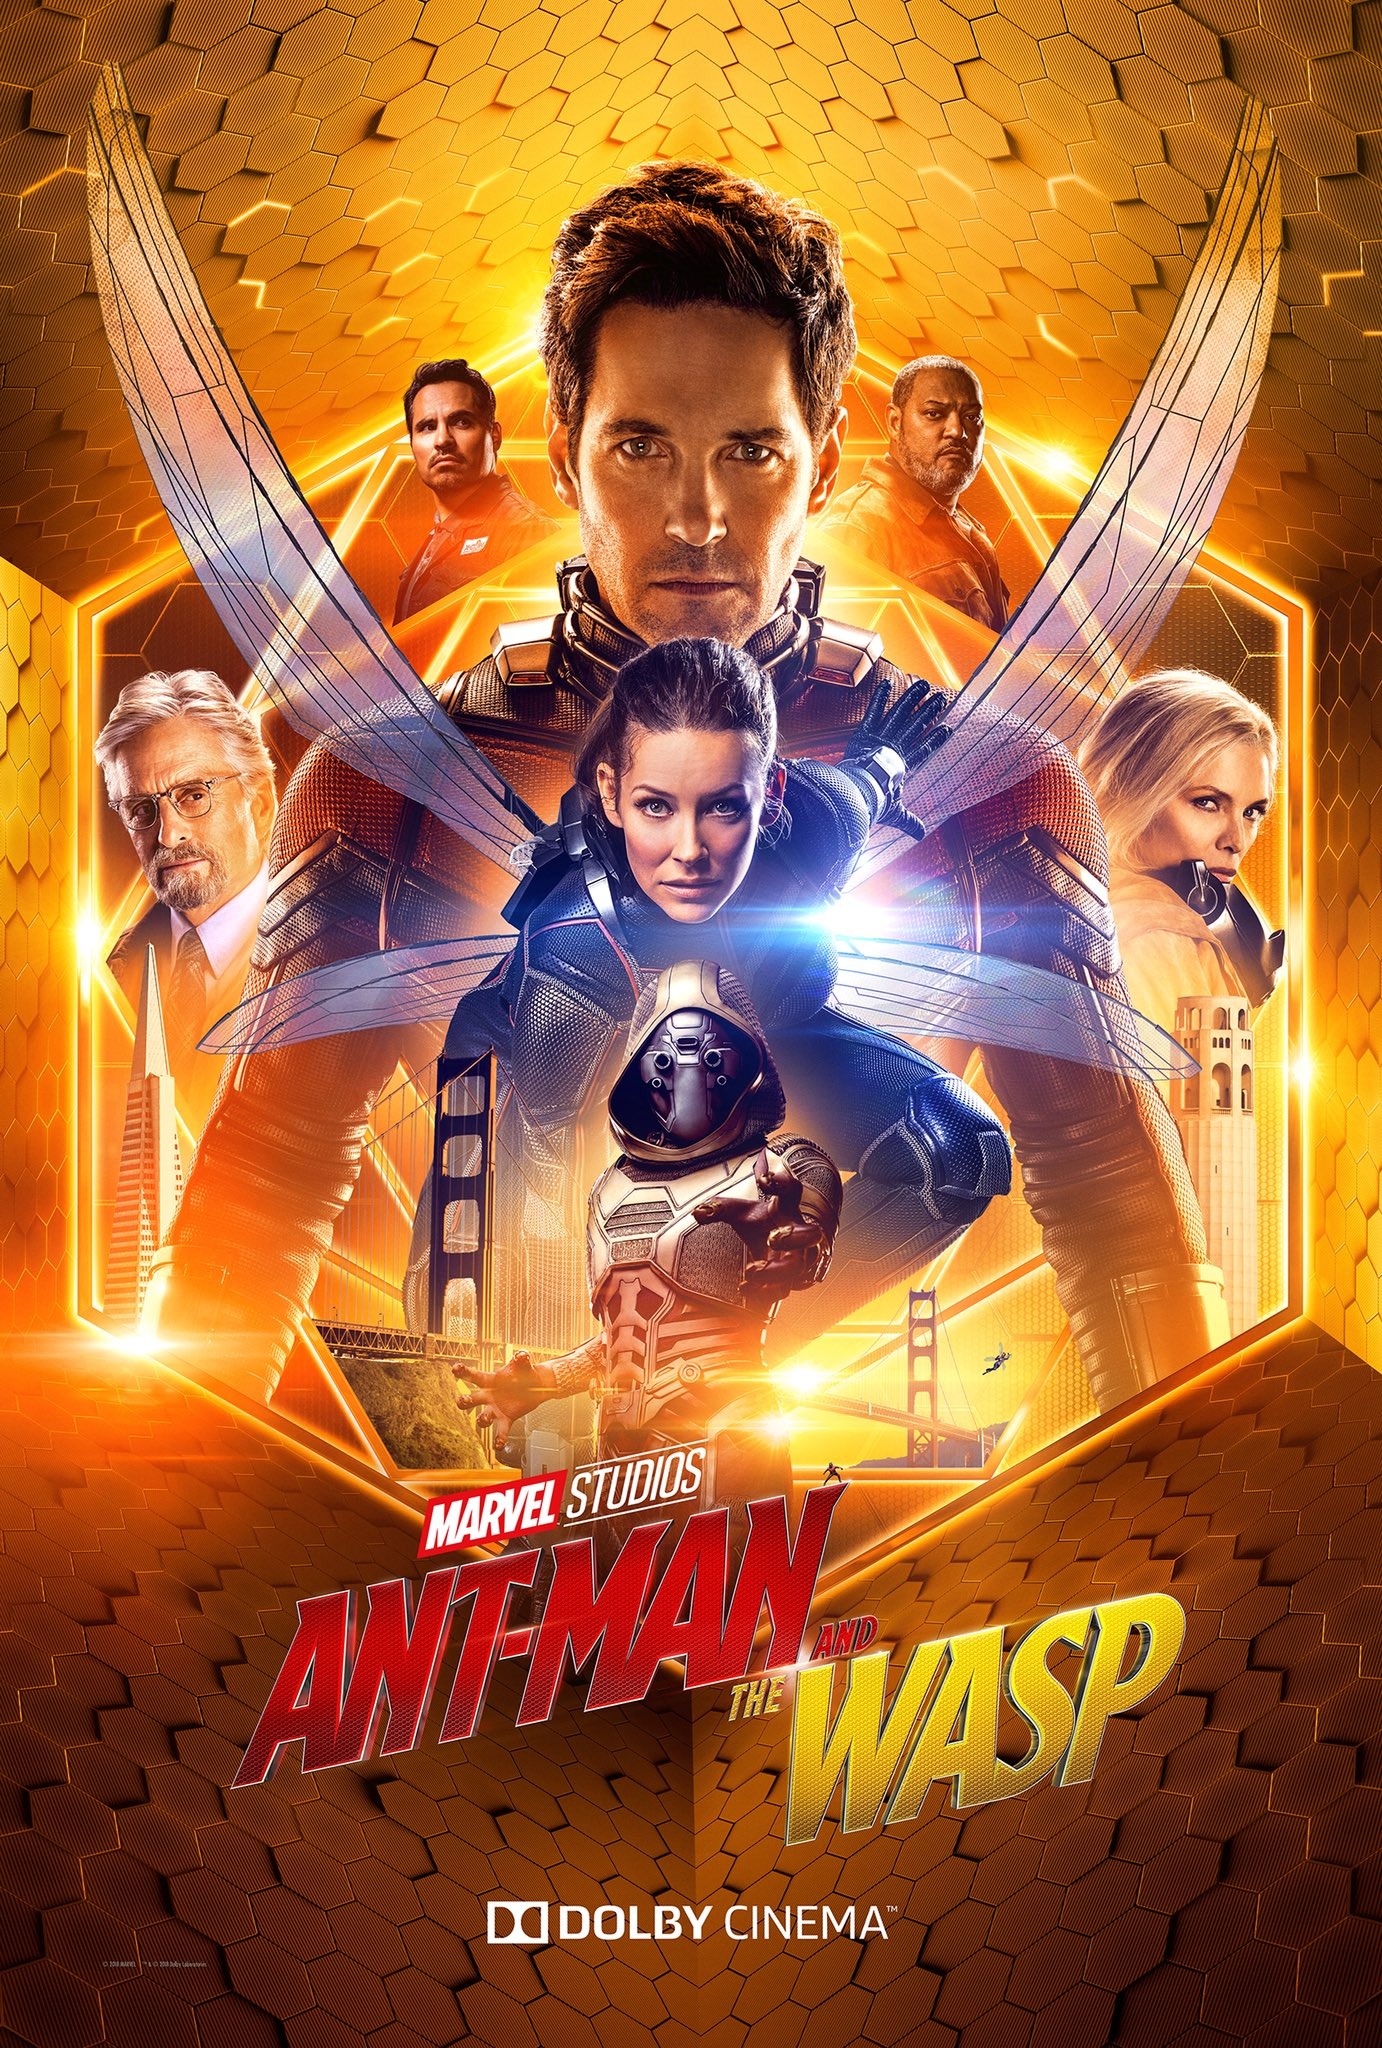 The Ant-Man and The Wasp: Quantumania